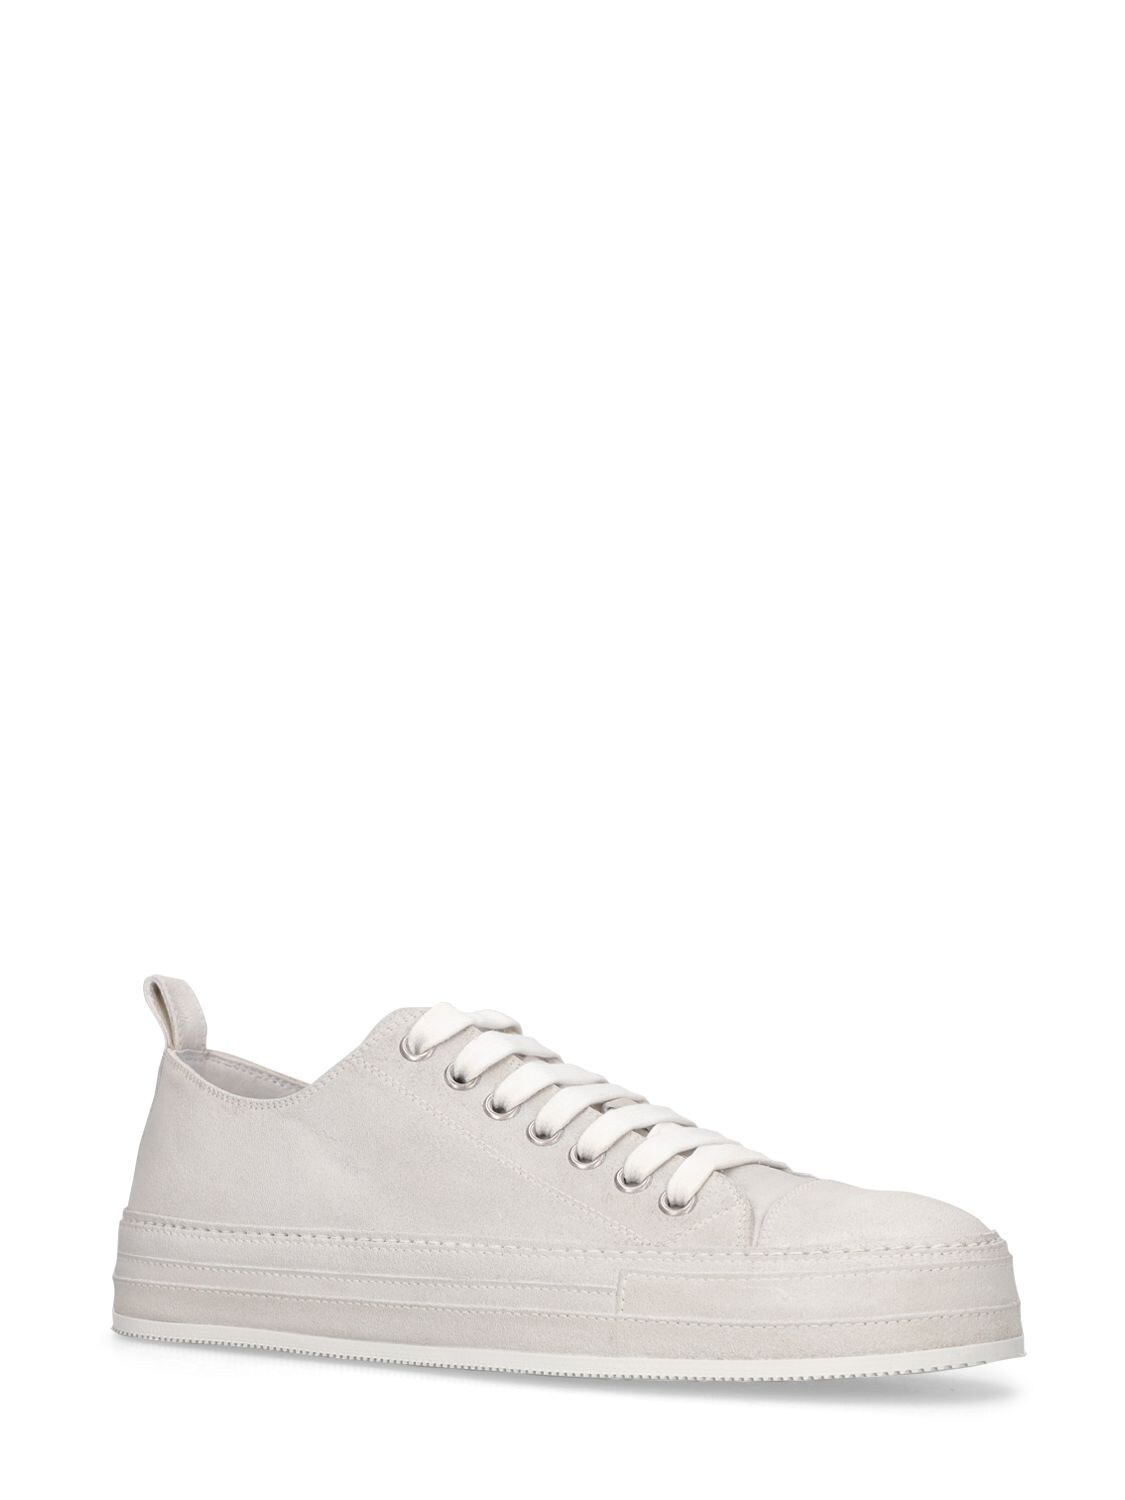 Ann Demeulemeester Gert Low Top Sneakers In White Modesens 